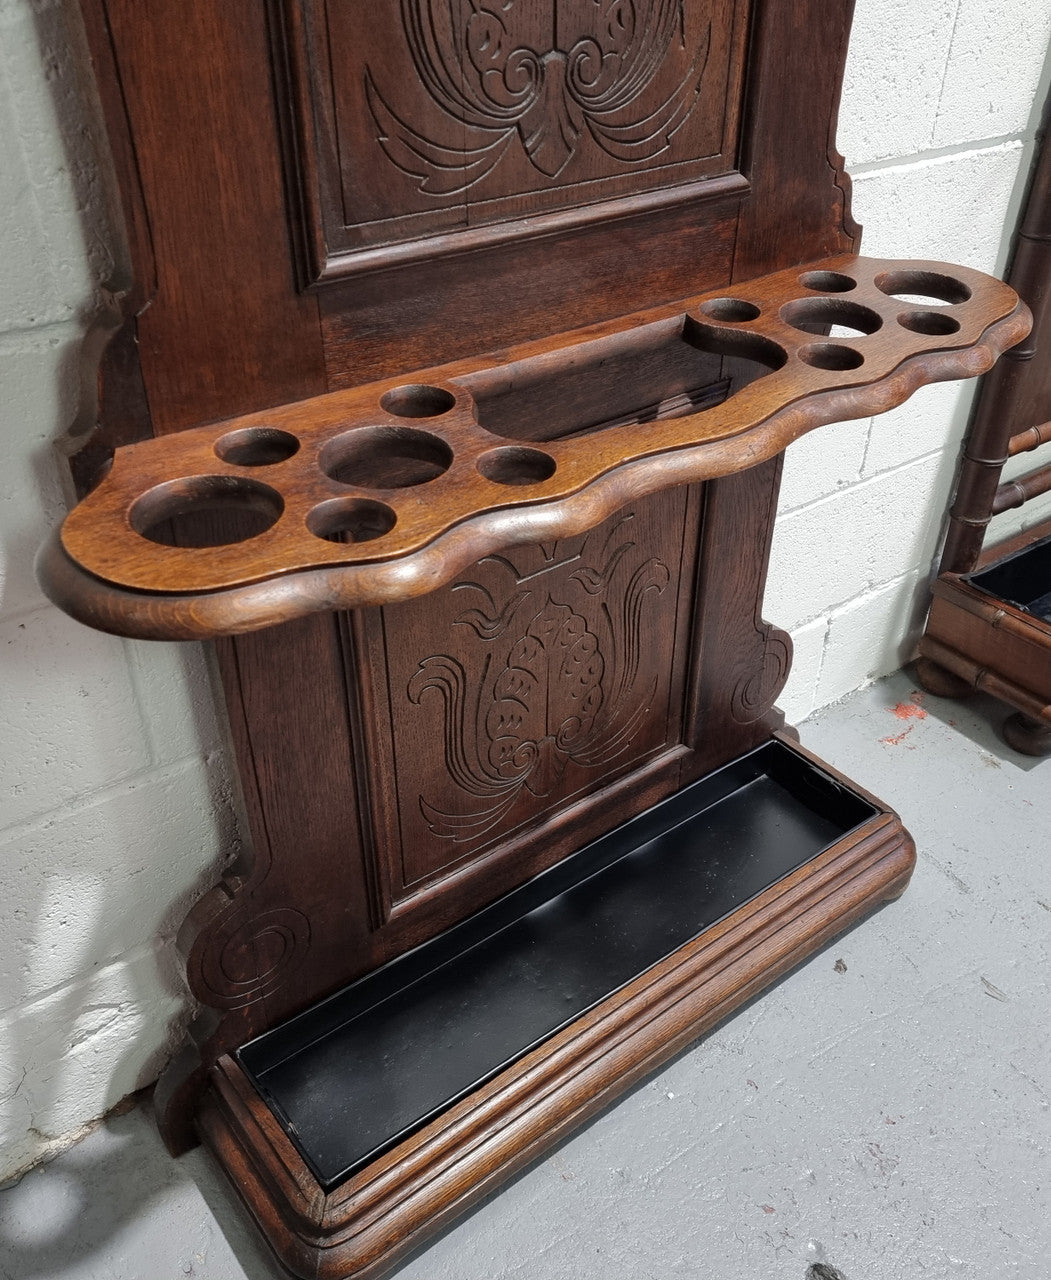 A beautiful Henry II style narrow French Oak hall stand. It has beautiful decorative carvings as well as 8 wooden hooks and storage for umbrellas and walking sticks. In good original detailed condition.